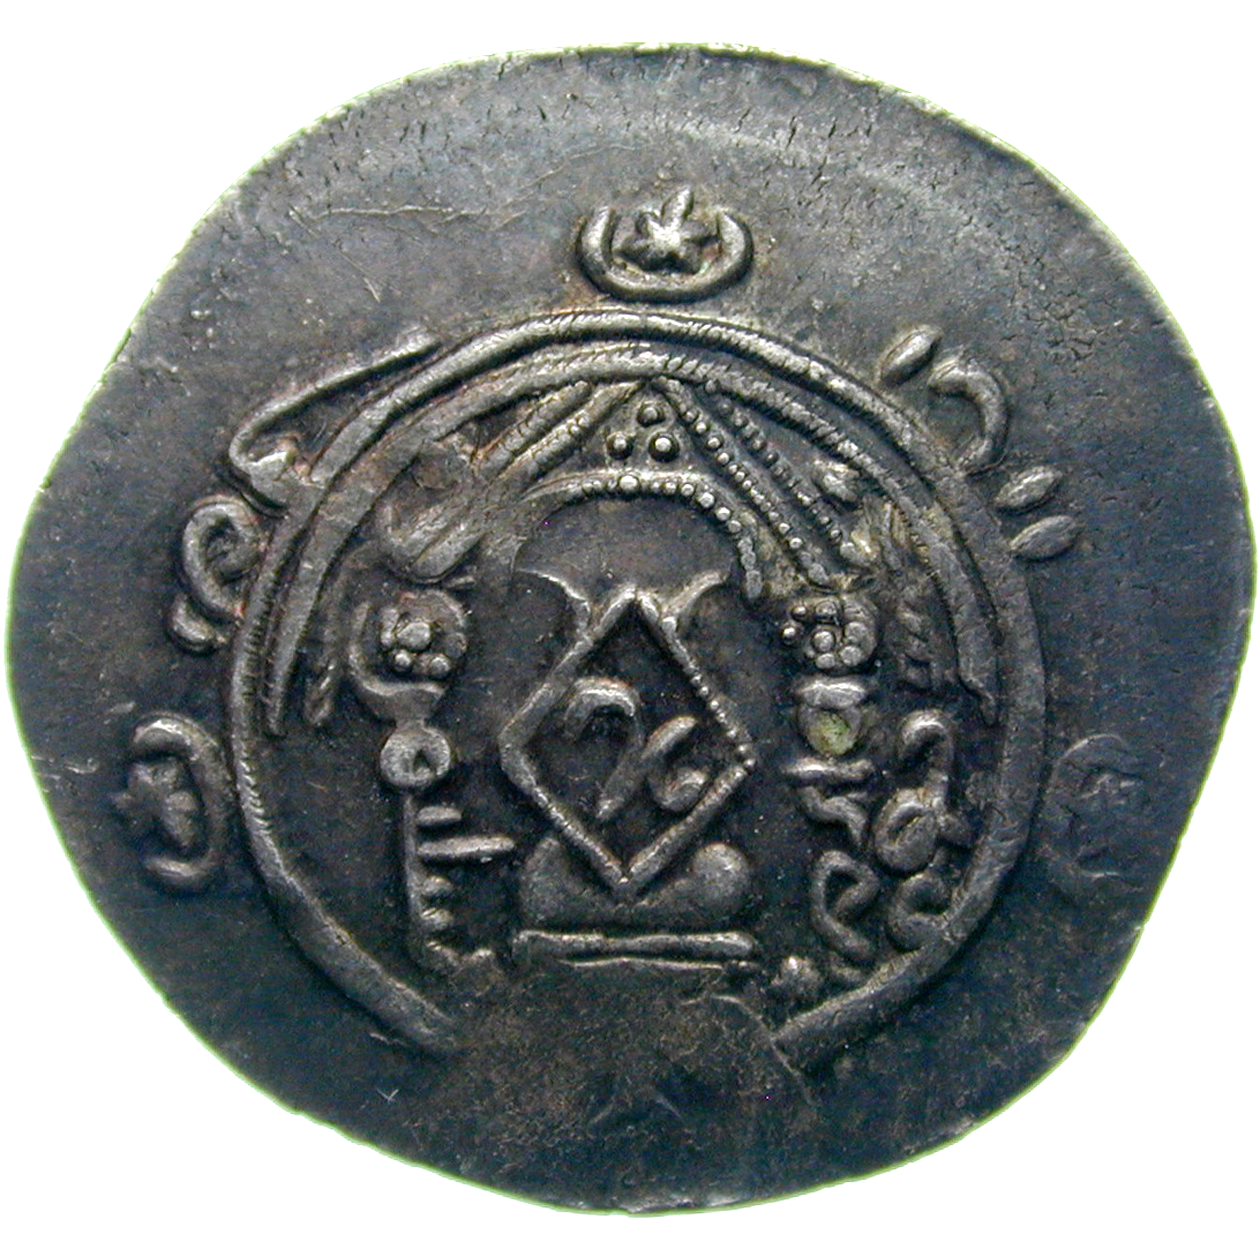 Abbasid Empire, Governorate of Tabaristan, Suleyman ibn Musa, Half Drachm (obverse)